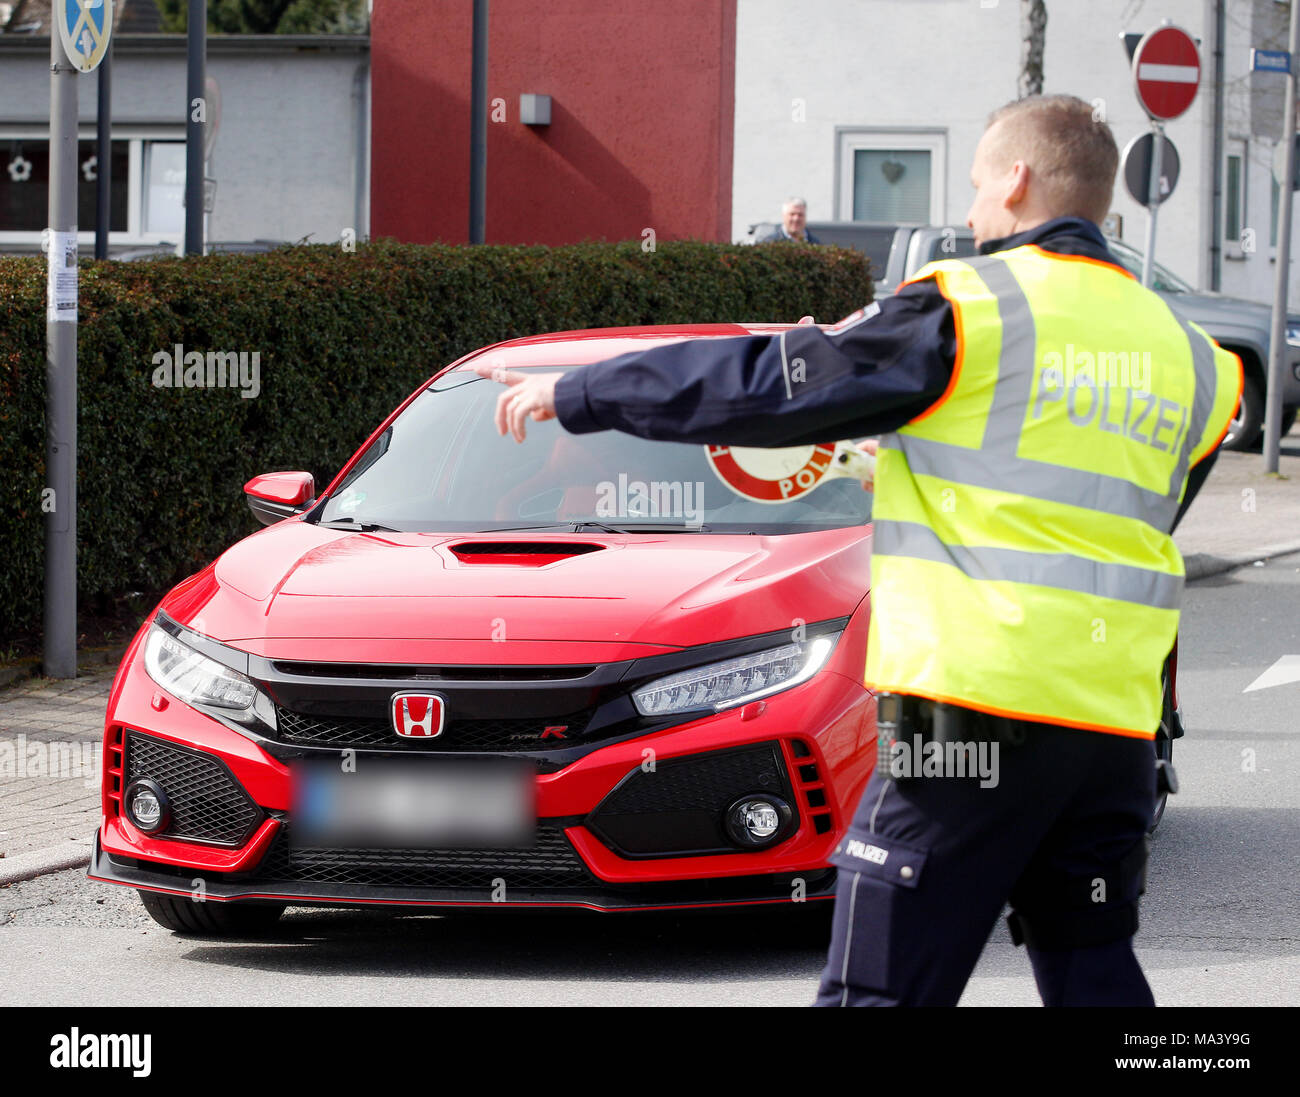 30 March 2018, Germany, Bochum: A police office checks a car at a large meet-up of car tuners. Photo: Roland Weihrauch/dpa - ATTENTION EDITORS: Licence plate blurred for legal reasons. Stock Photo